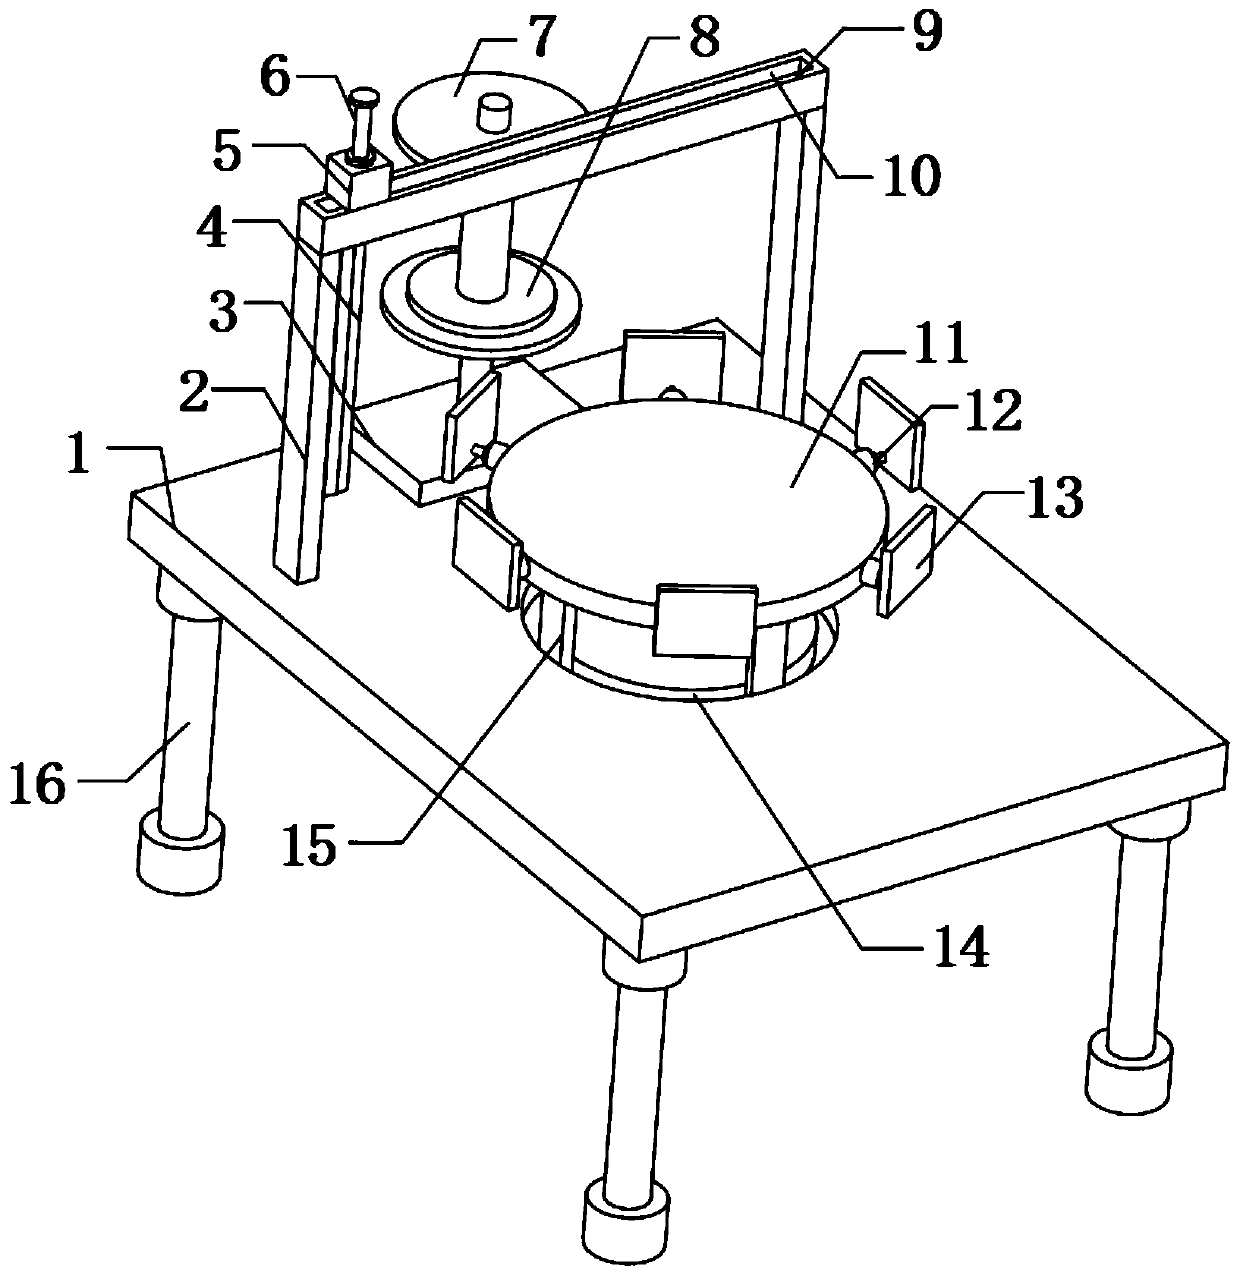 Article packaging device for logistics transportation